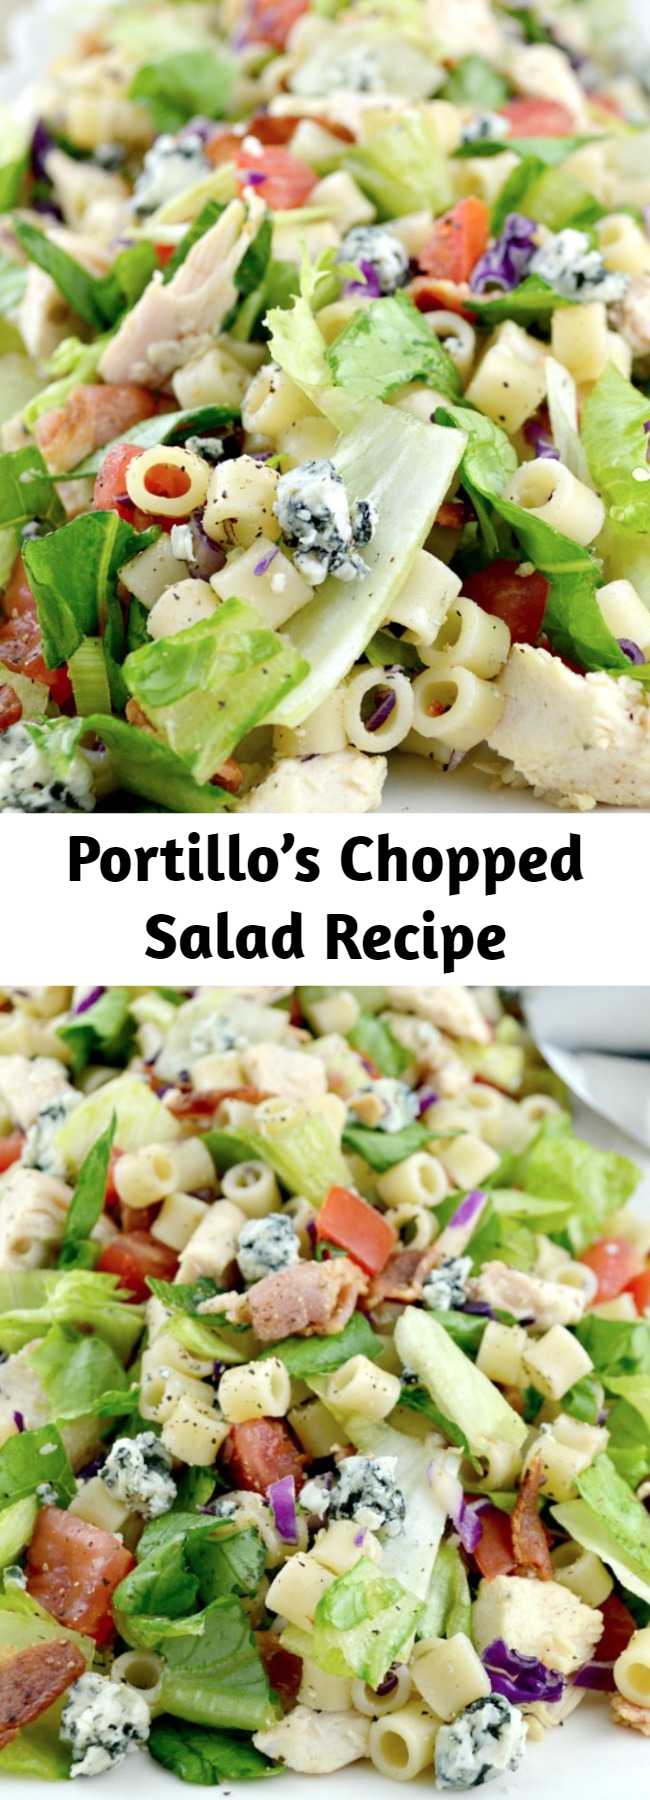 Portillo’s Chopped Salad Recipe - Portillo’s Chopped Salad Recipe - Portillo's Chopped Salad is a copycat recipe like the restaurant version. Loaded with great chicken, pasta, bacon, and blue cheese then dressed in a sweet Italian dressing!